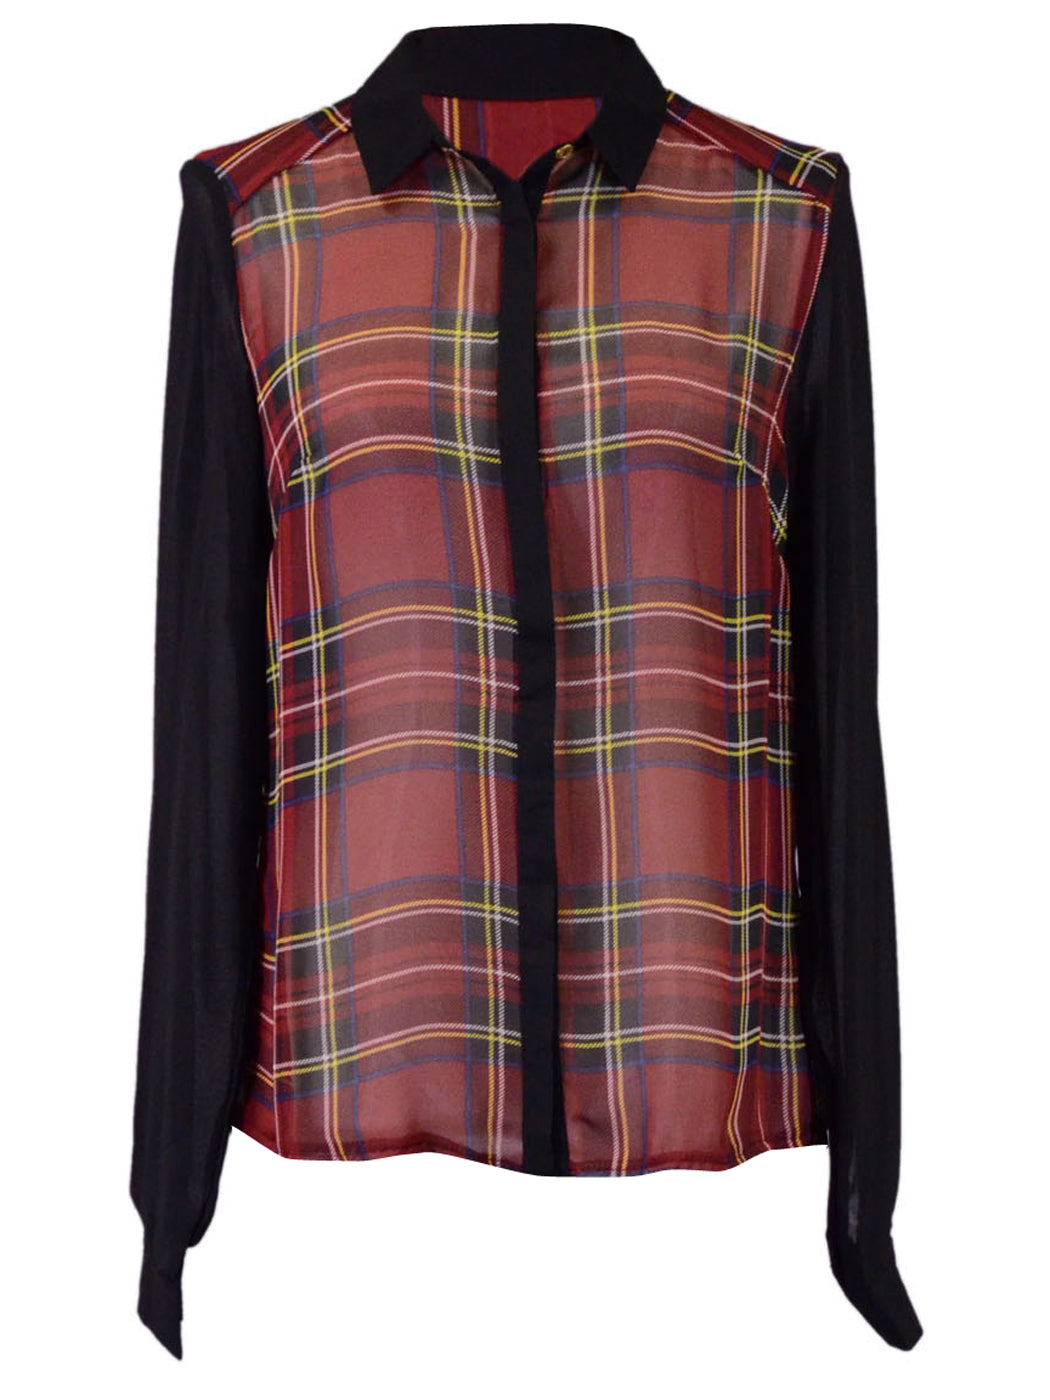 Oxford Circus Preppy Plaid Checker Sheer Long Sleeves Color Blouse Top